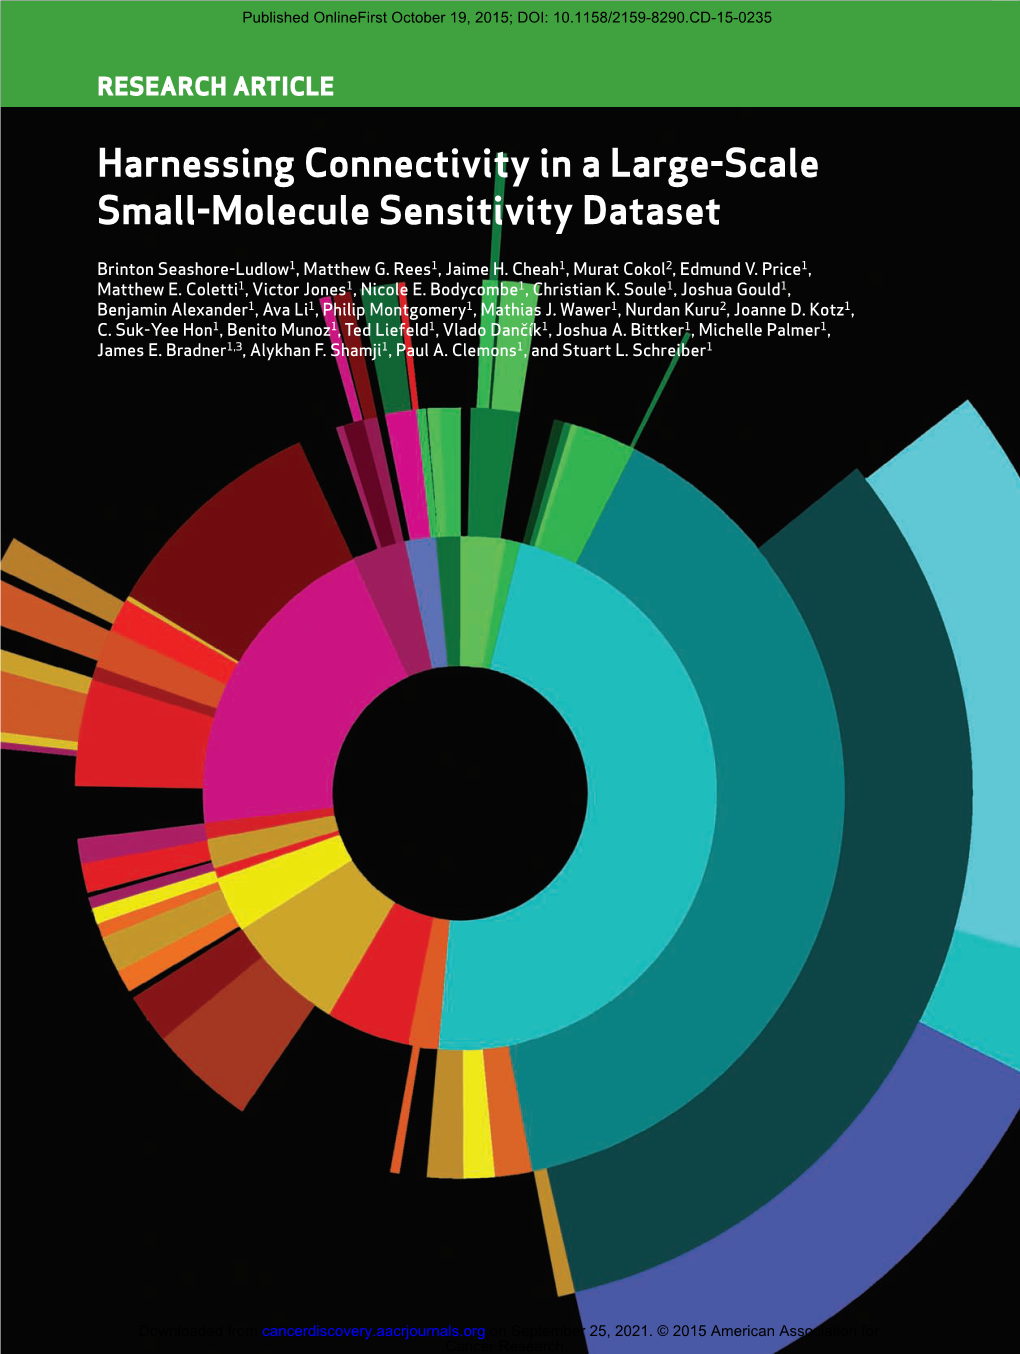 Harnessing Connectivity in a Large-Scale Small-Molecule Sensitivity Dataset